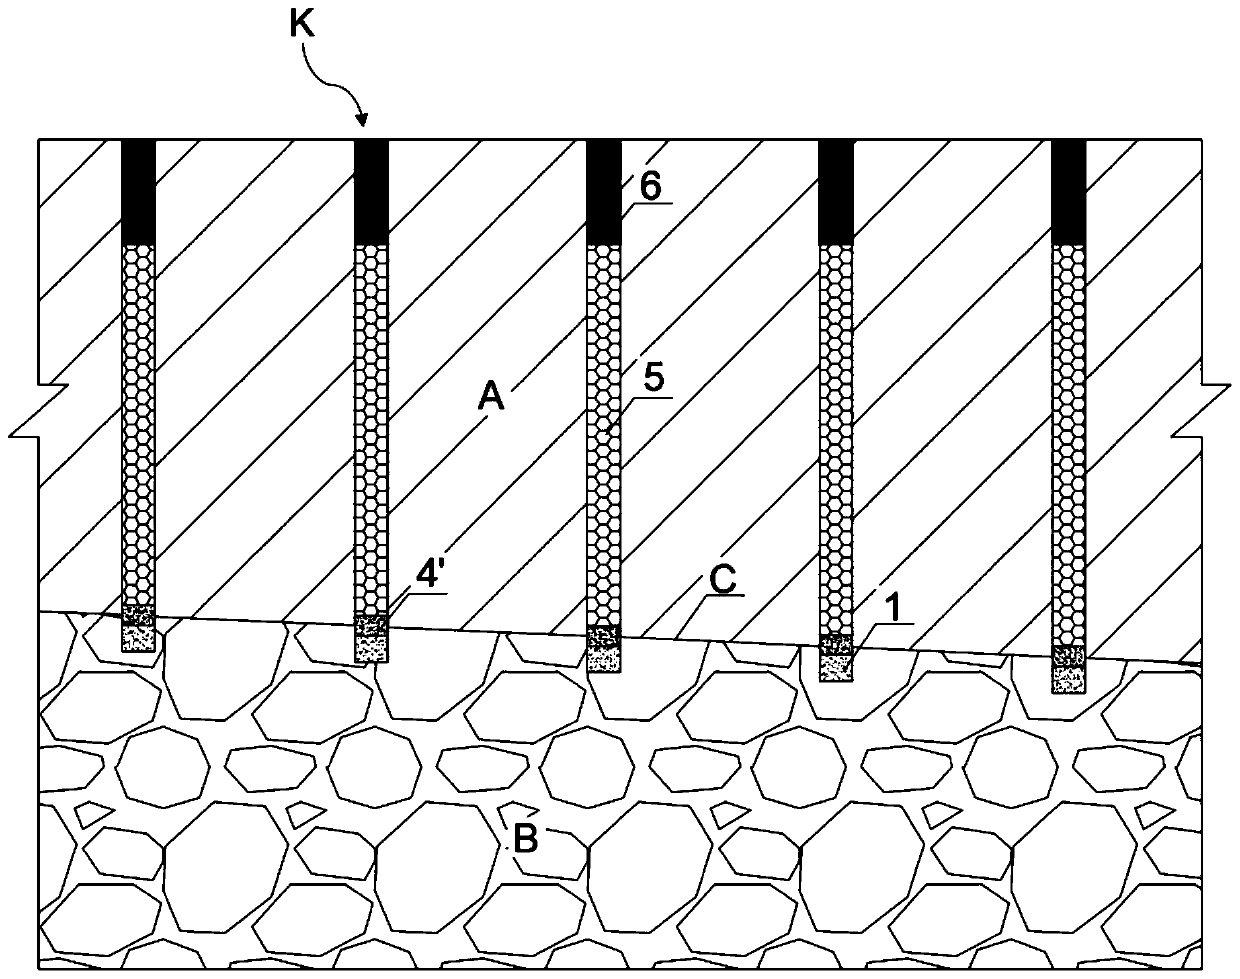 Non-destructive blasting excavation method without integrated rock interface foundation